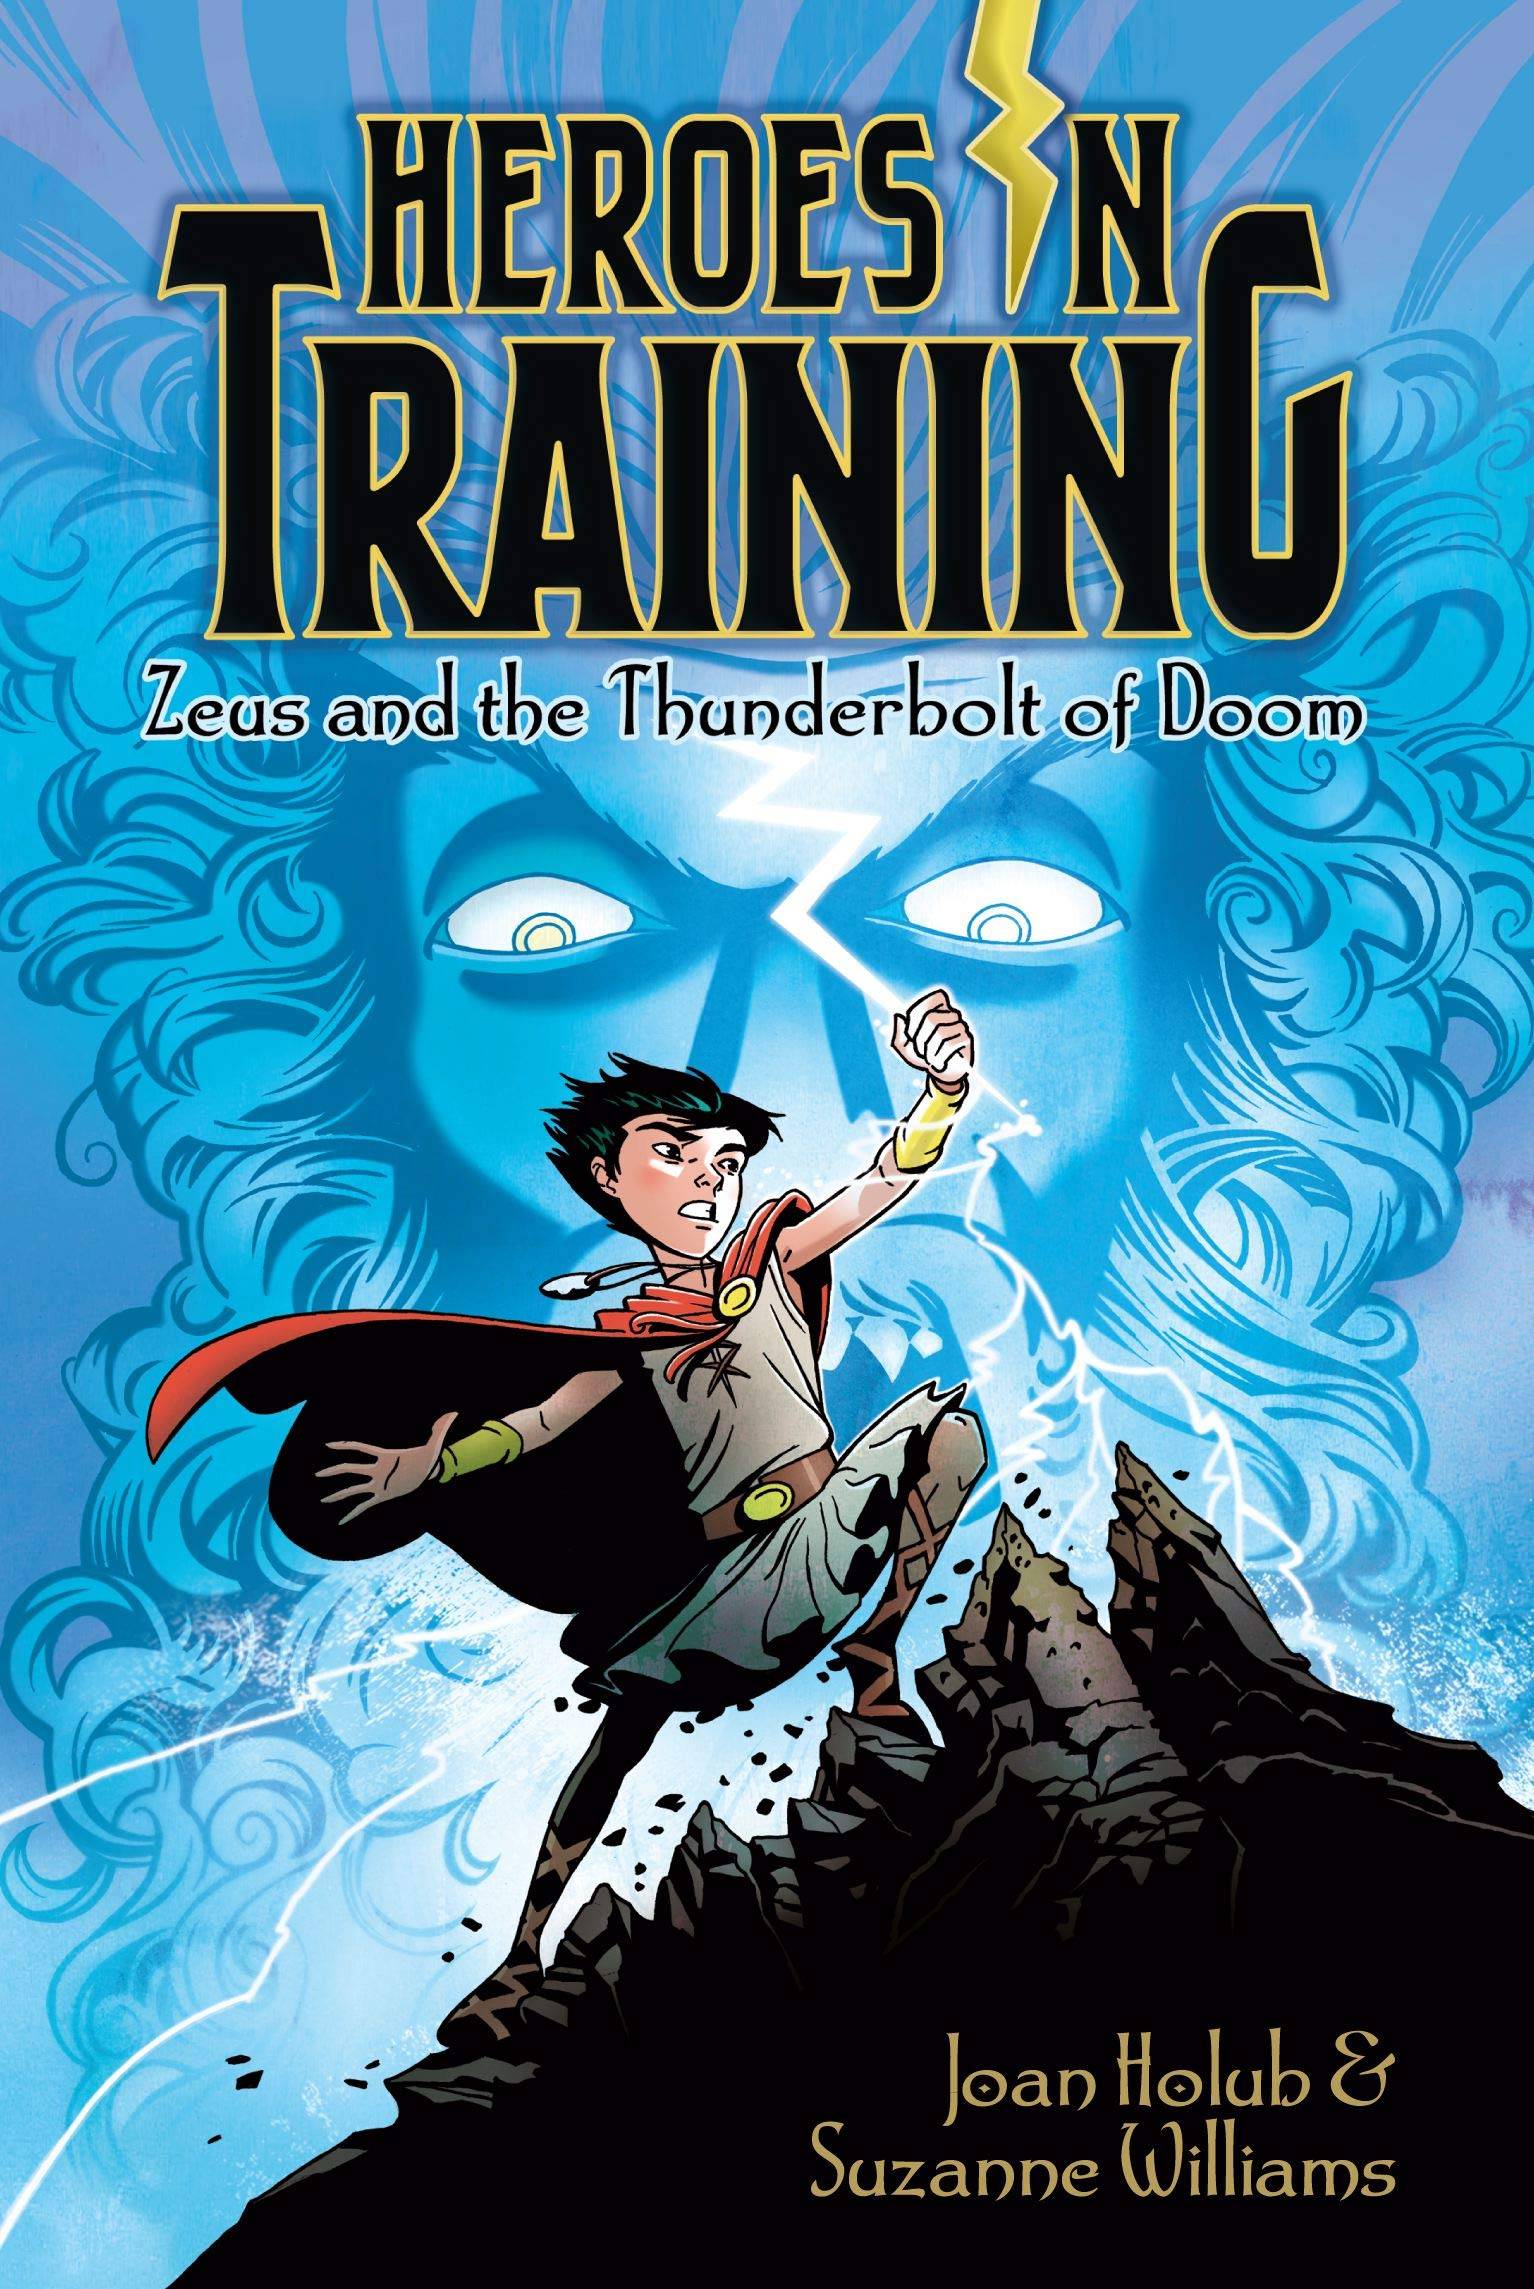 IMG : Heroes in Training Zeus and the thunderbolt of the Doom#1